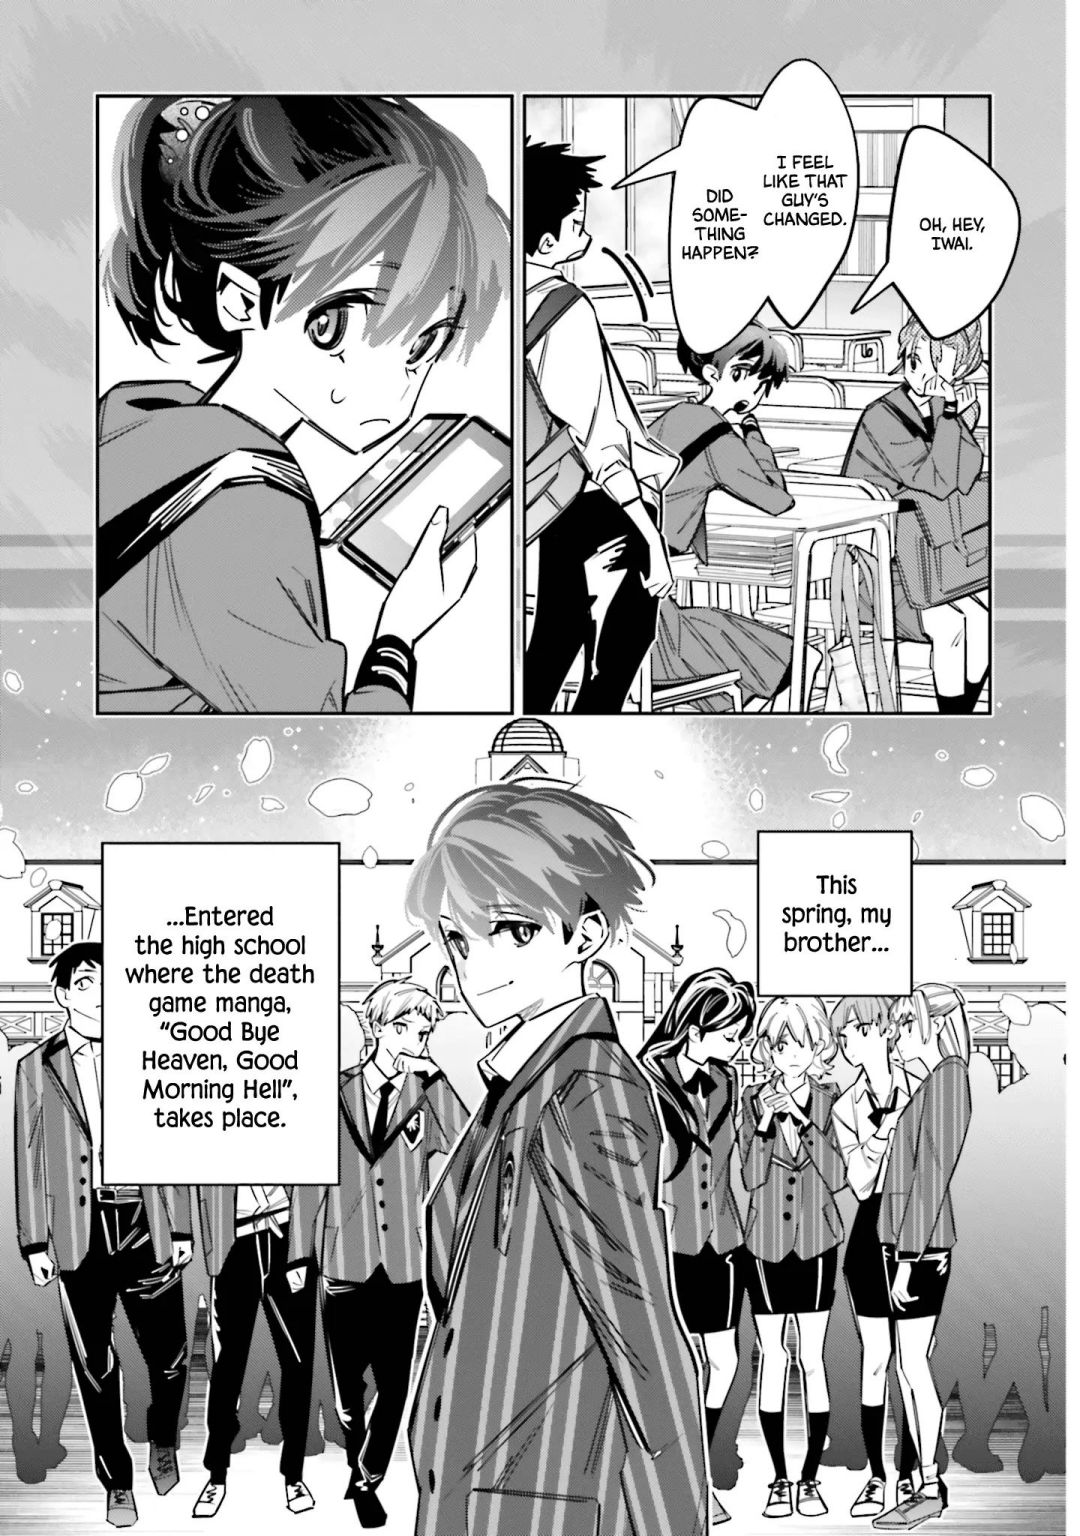 I Reincarnated As The Little Sister Of A Death Game Manga’S Murd3R Mastermind And Failed - chapter 7 - #3